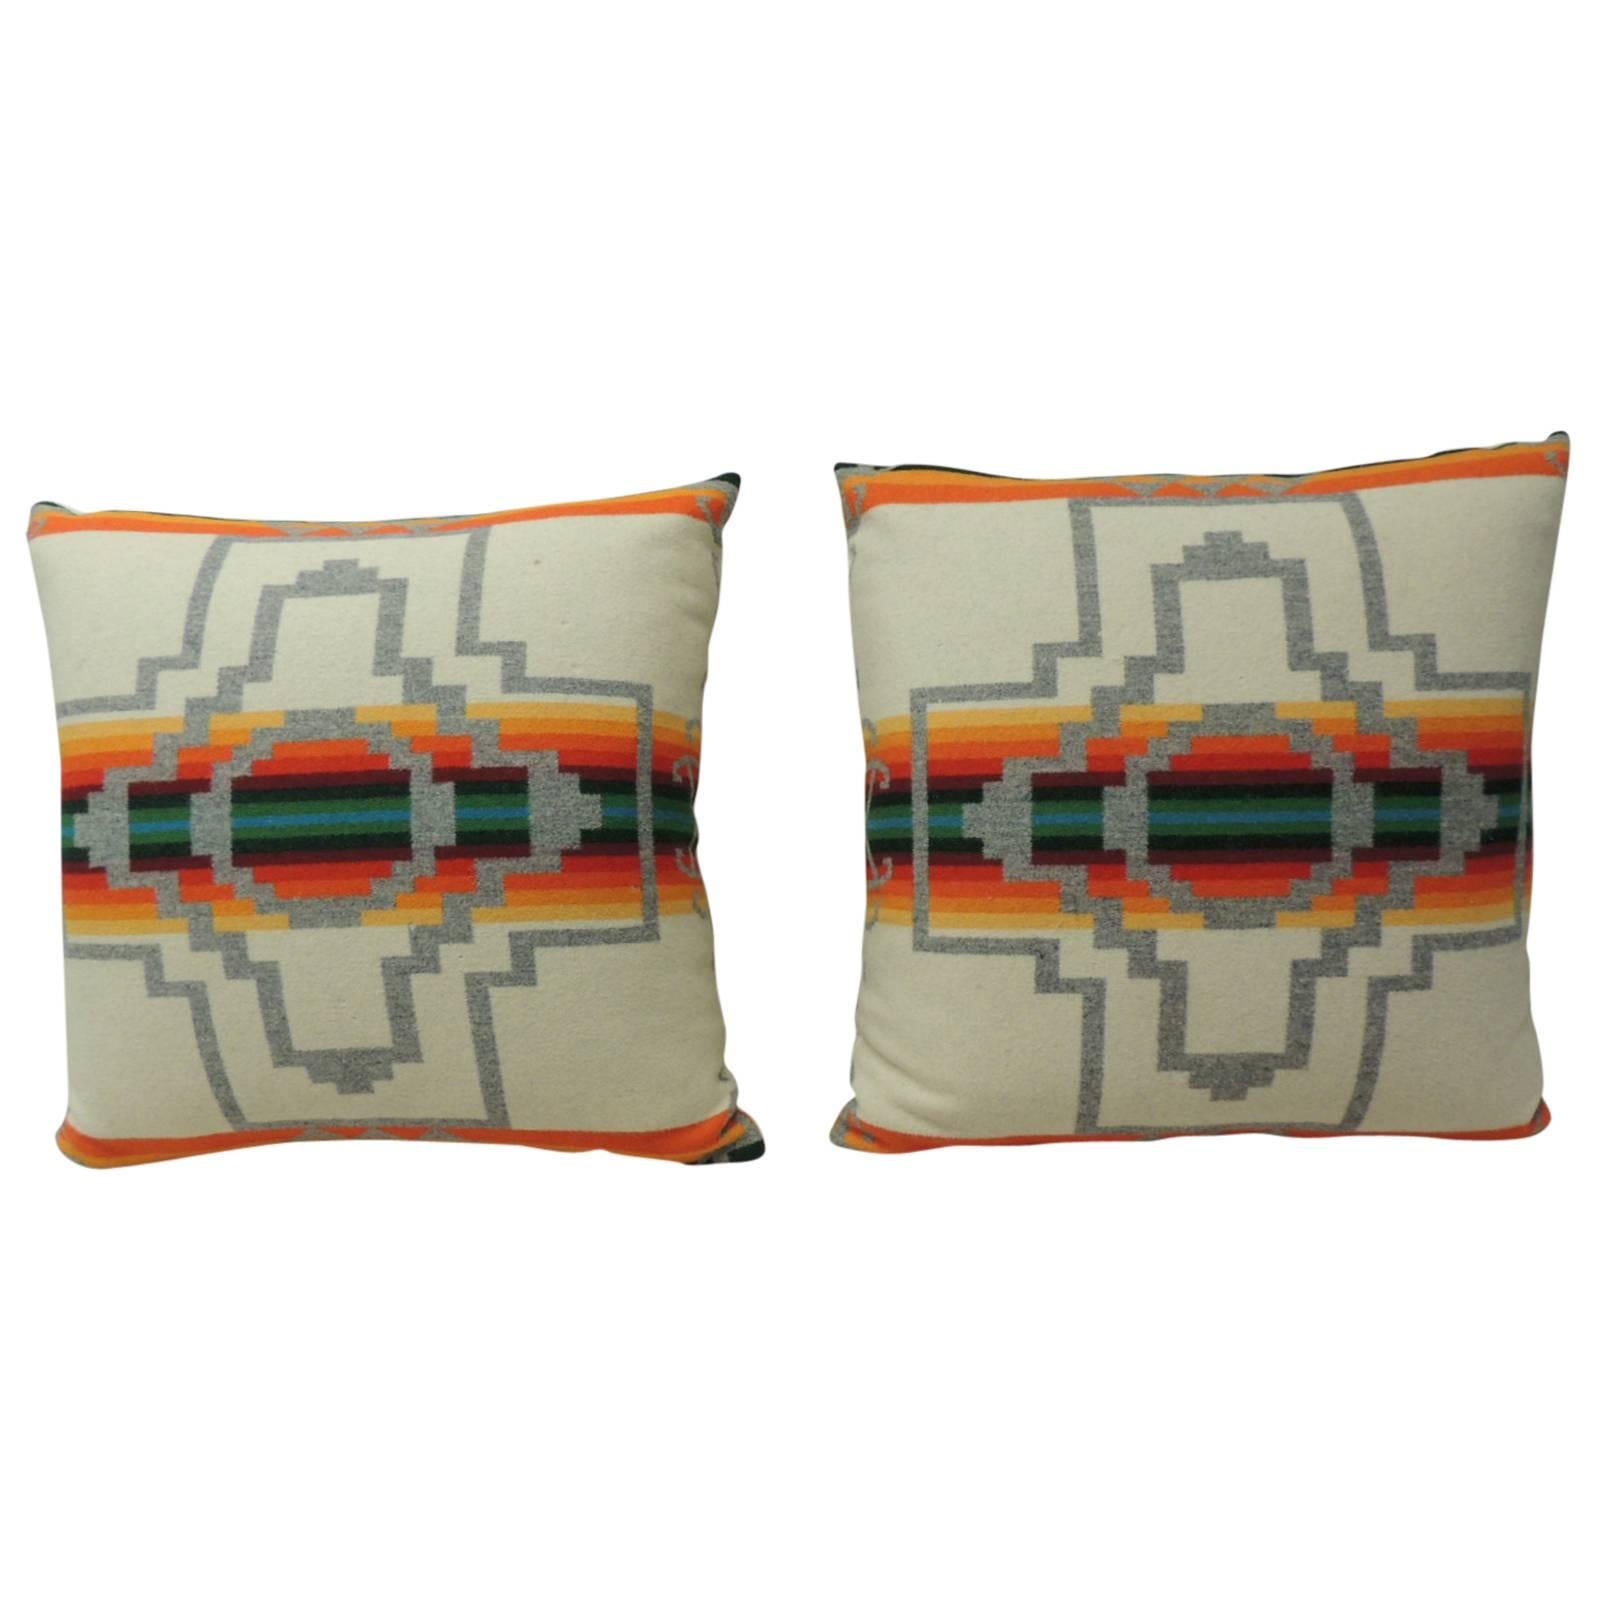 Pair of American Indian Pattern Blanket Pillows in Natural